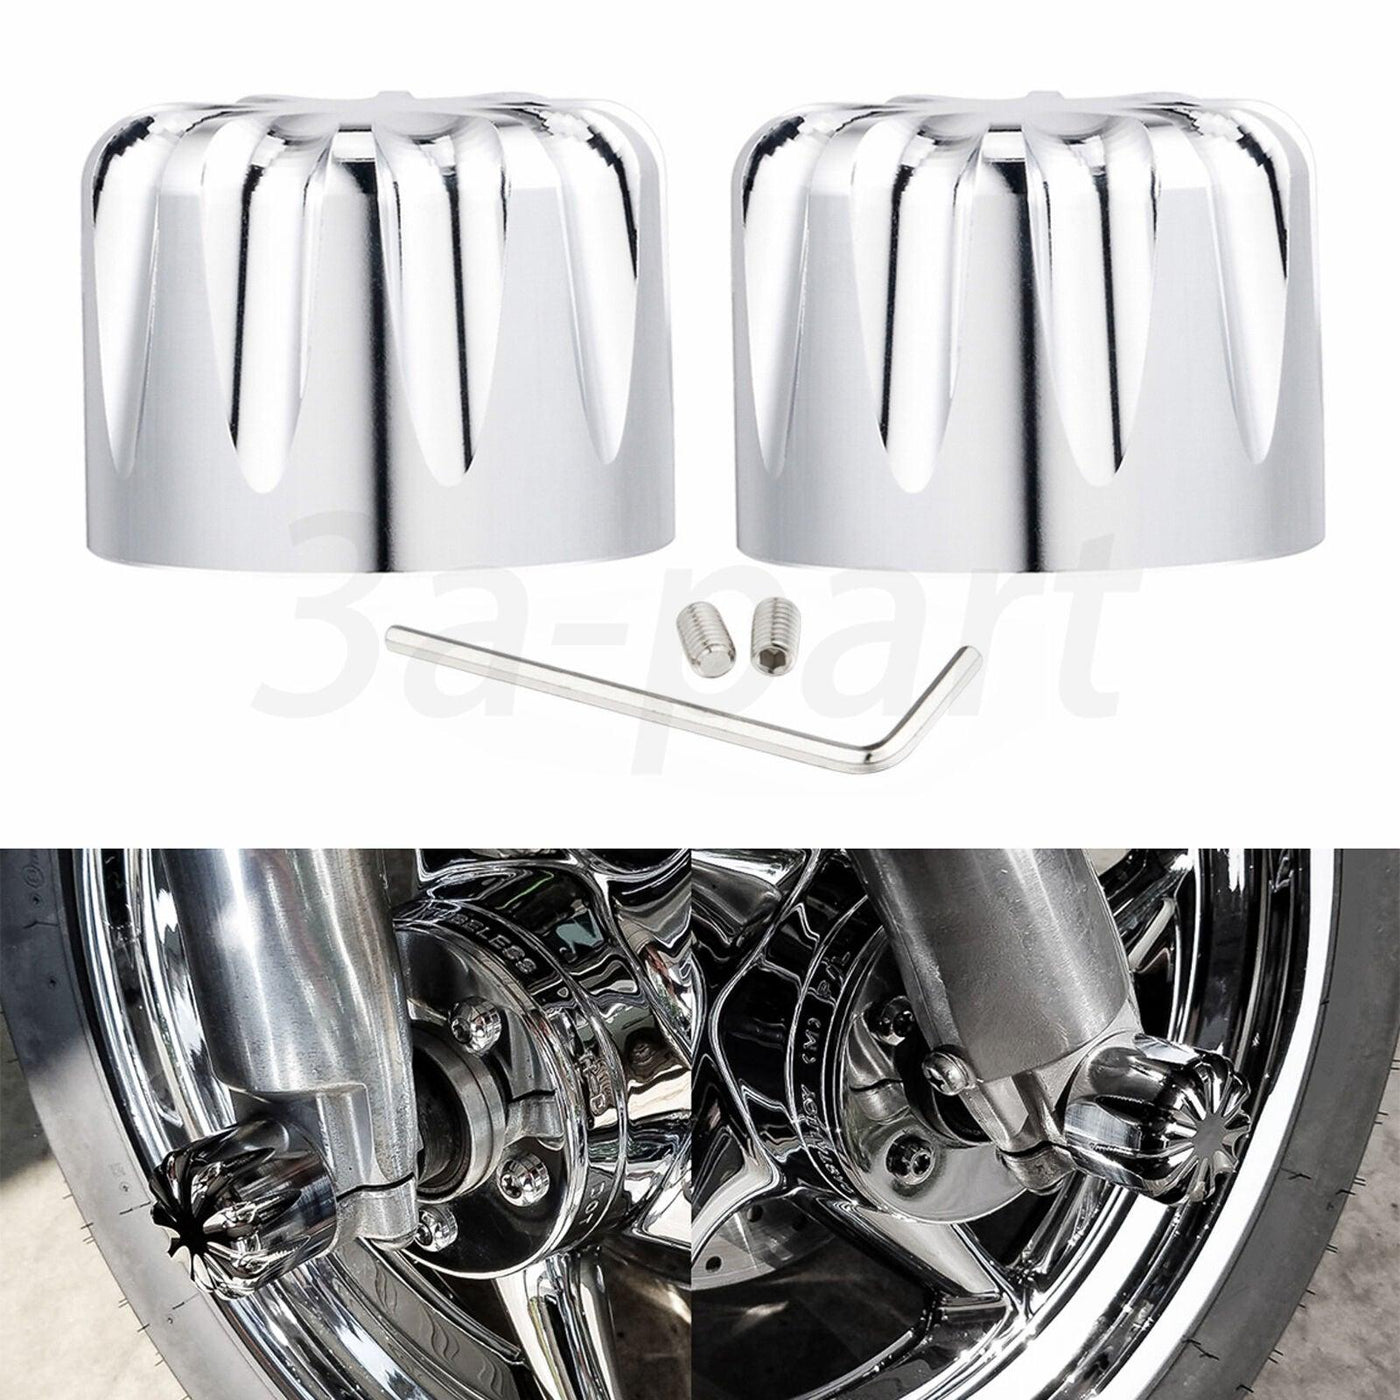 Chrome Front Cut Axle Nut Cap Covers Fit for Harley Softail Touring Street Glide - Moto Life Products